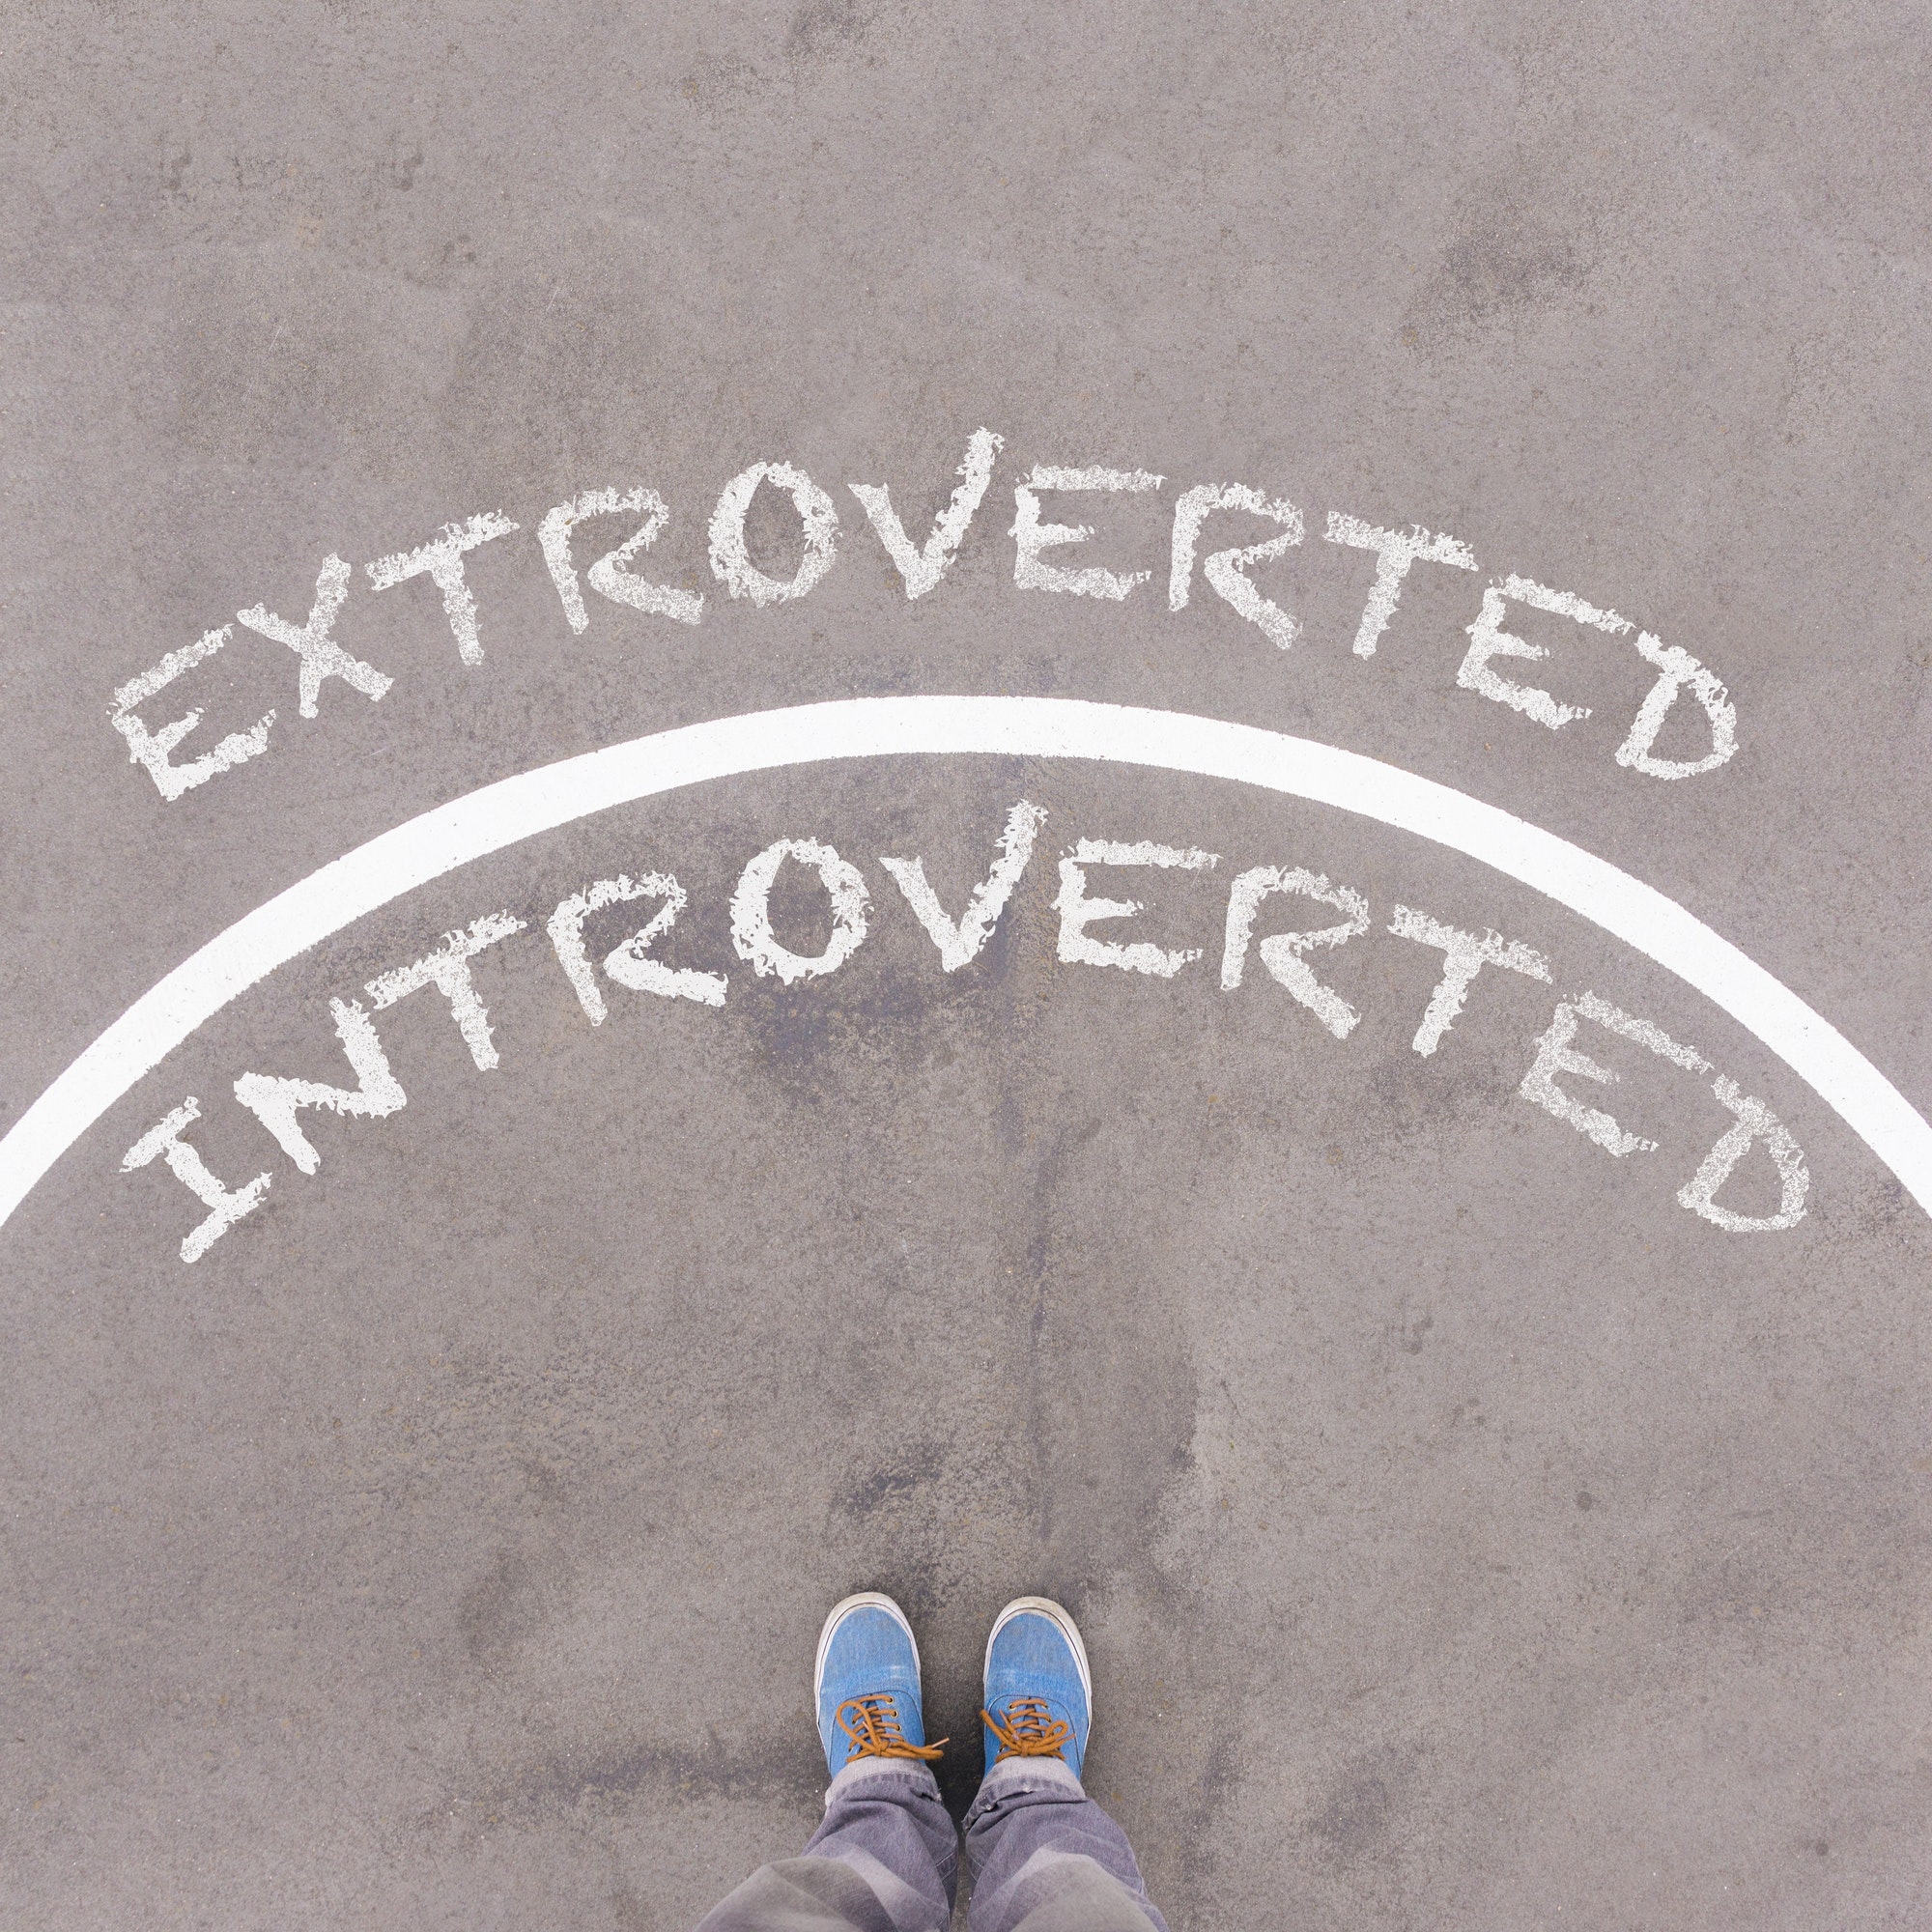 Extroverted vs Introverted text on asphalt ground